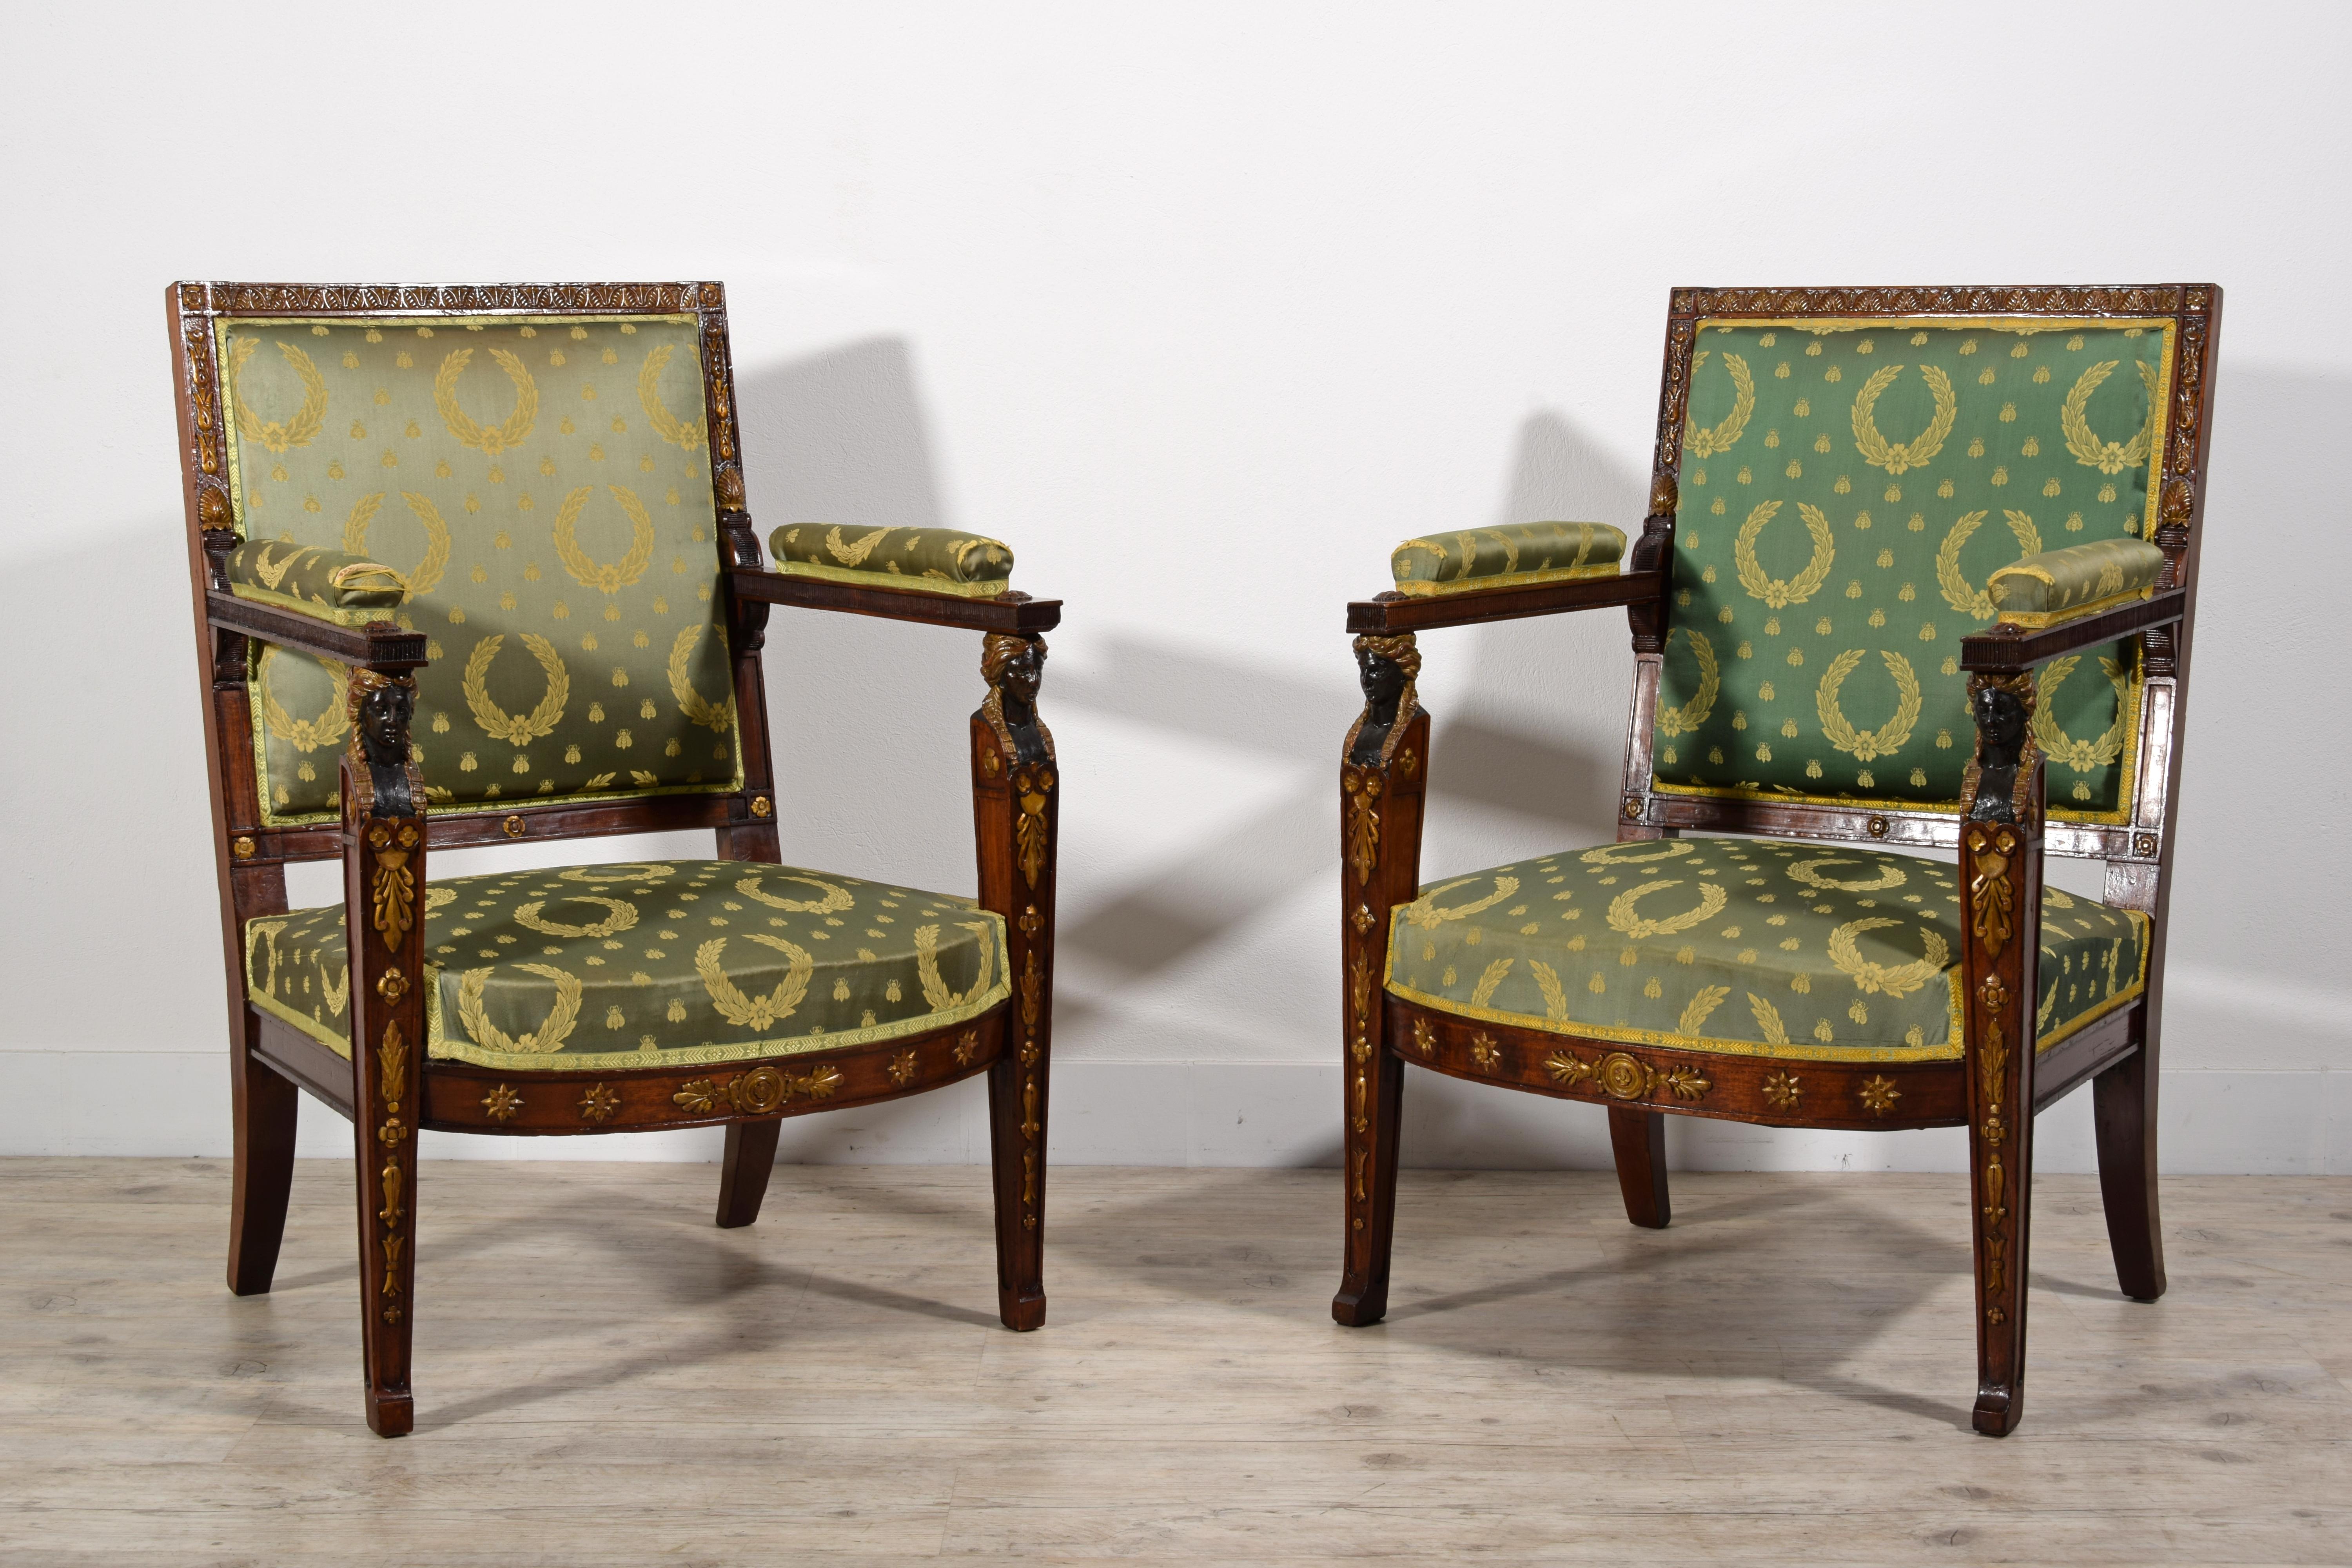 19th century, Pair of French Empire style Wood Armchairs 
This delightful pair of wood armchairs was made in France in the nineteenth century in the Empire style. The plant is straight, the rear legs are slightly arched outwards, while the front